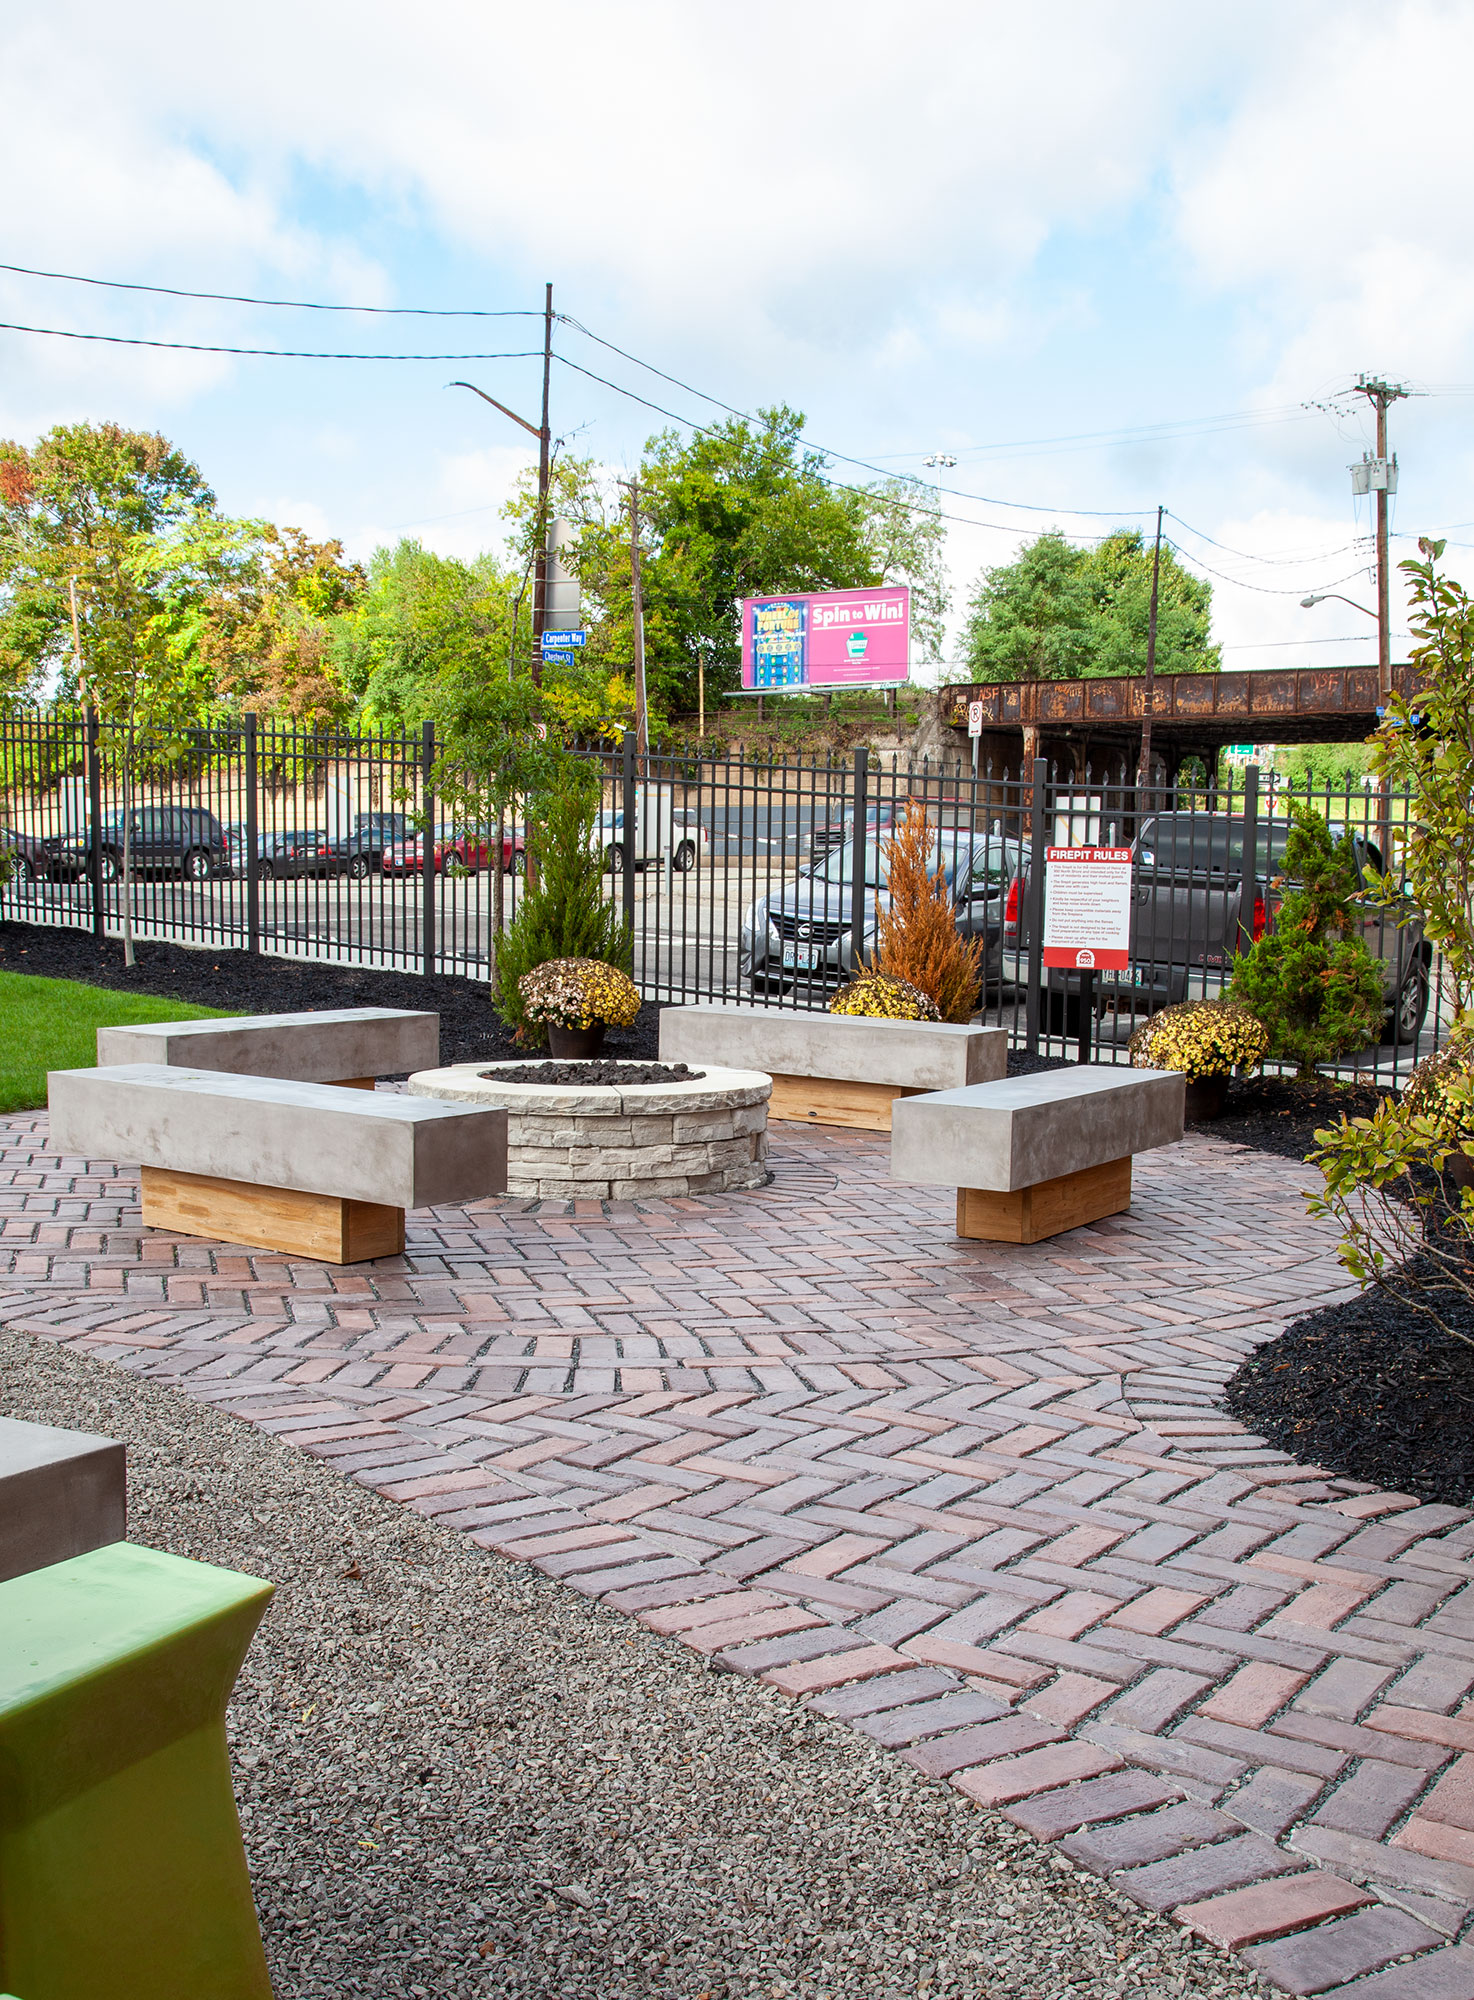 A circular fire pit and stone benches are surrounded by tri-colored Town Hall pavers, with nearby bushes adding subtle flecks of color.